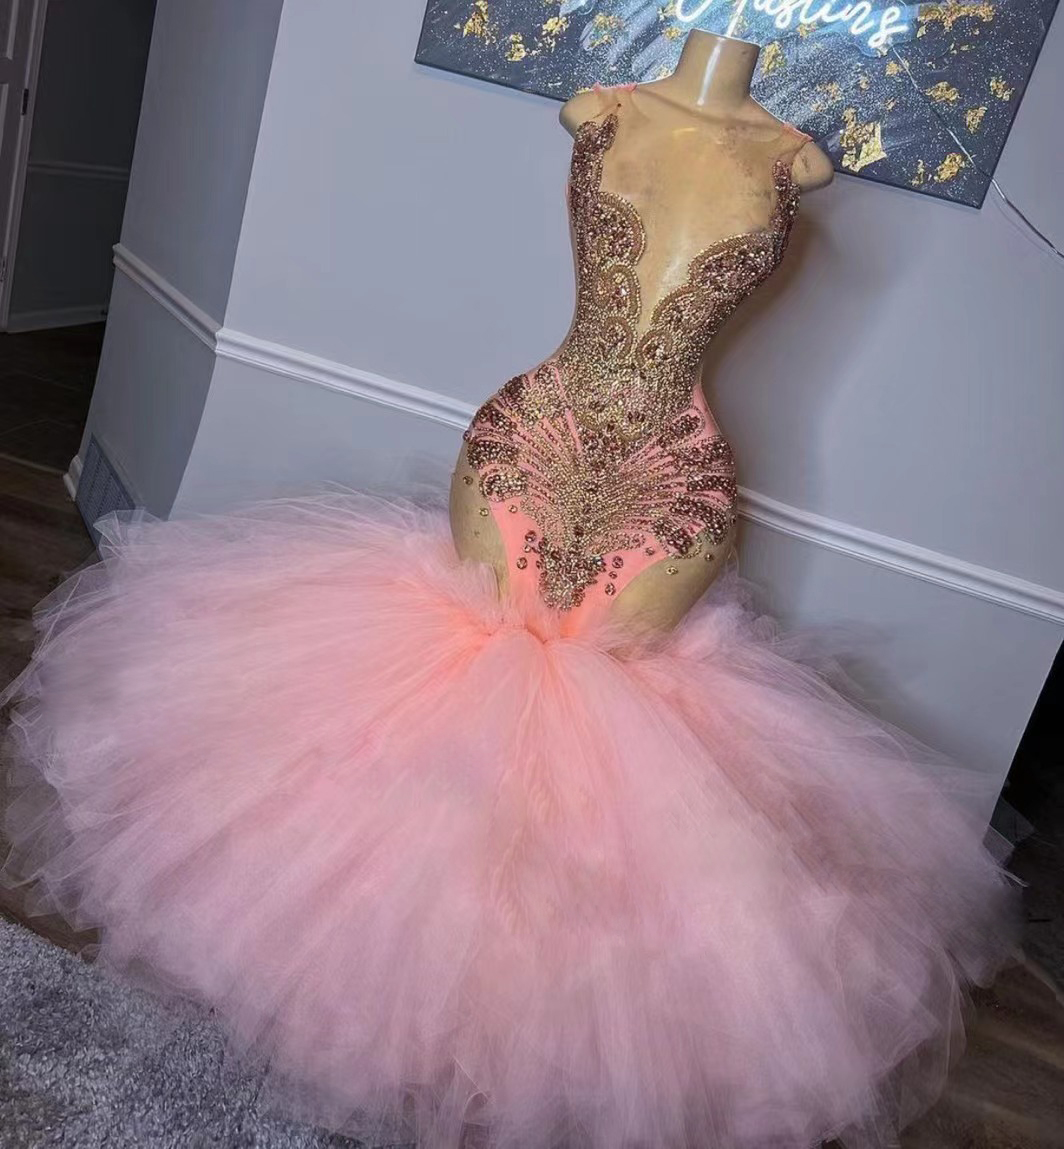 Crystals Prom Dresses, Prom Ball Gown, Tiered Prom Dresses, Pageant Dresses For Women, Diamonds Prom Dresses, Vestidos De Graudacion, Pink Prom